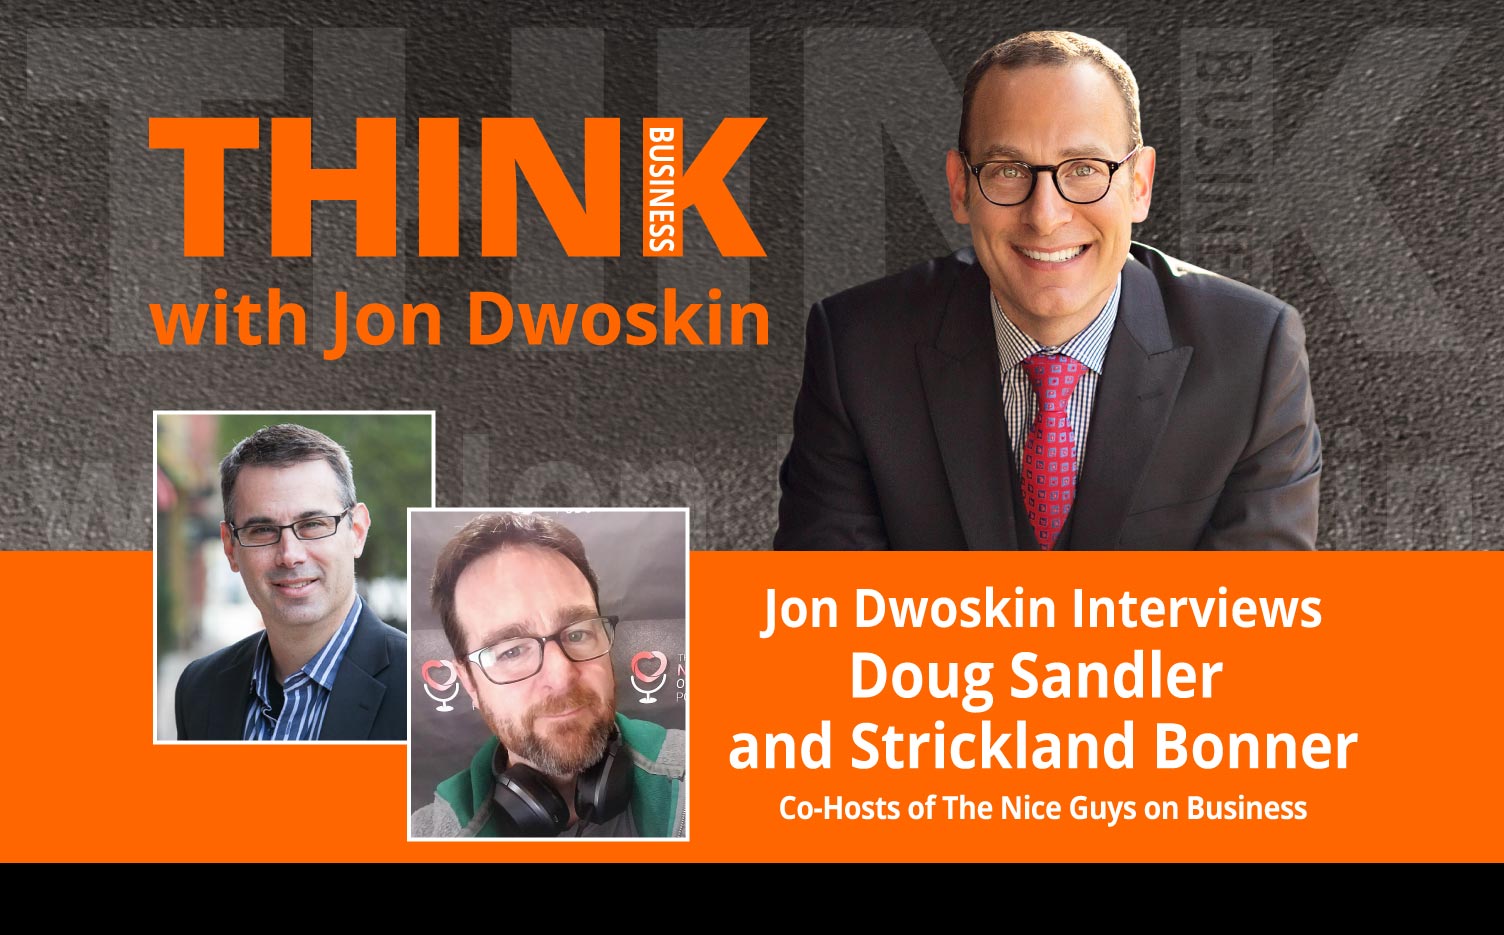 THINK Business Podcast: Jon Dwoskin Interviews Doug Sandler and Strickland Bonner, Co-Hosts of The Nice Guys on Business